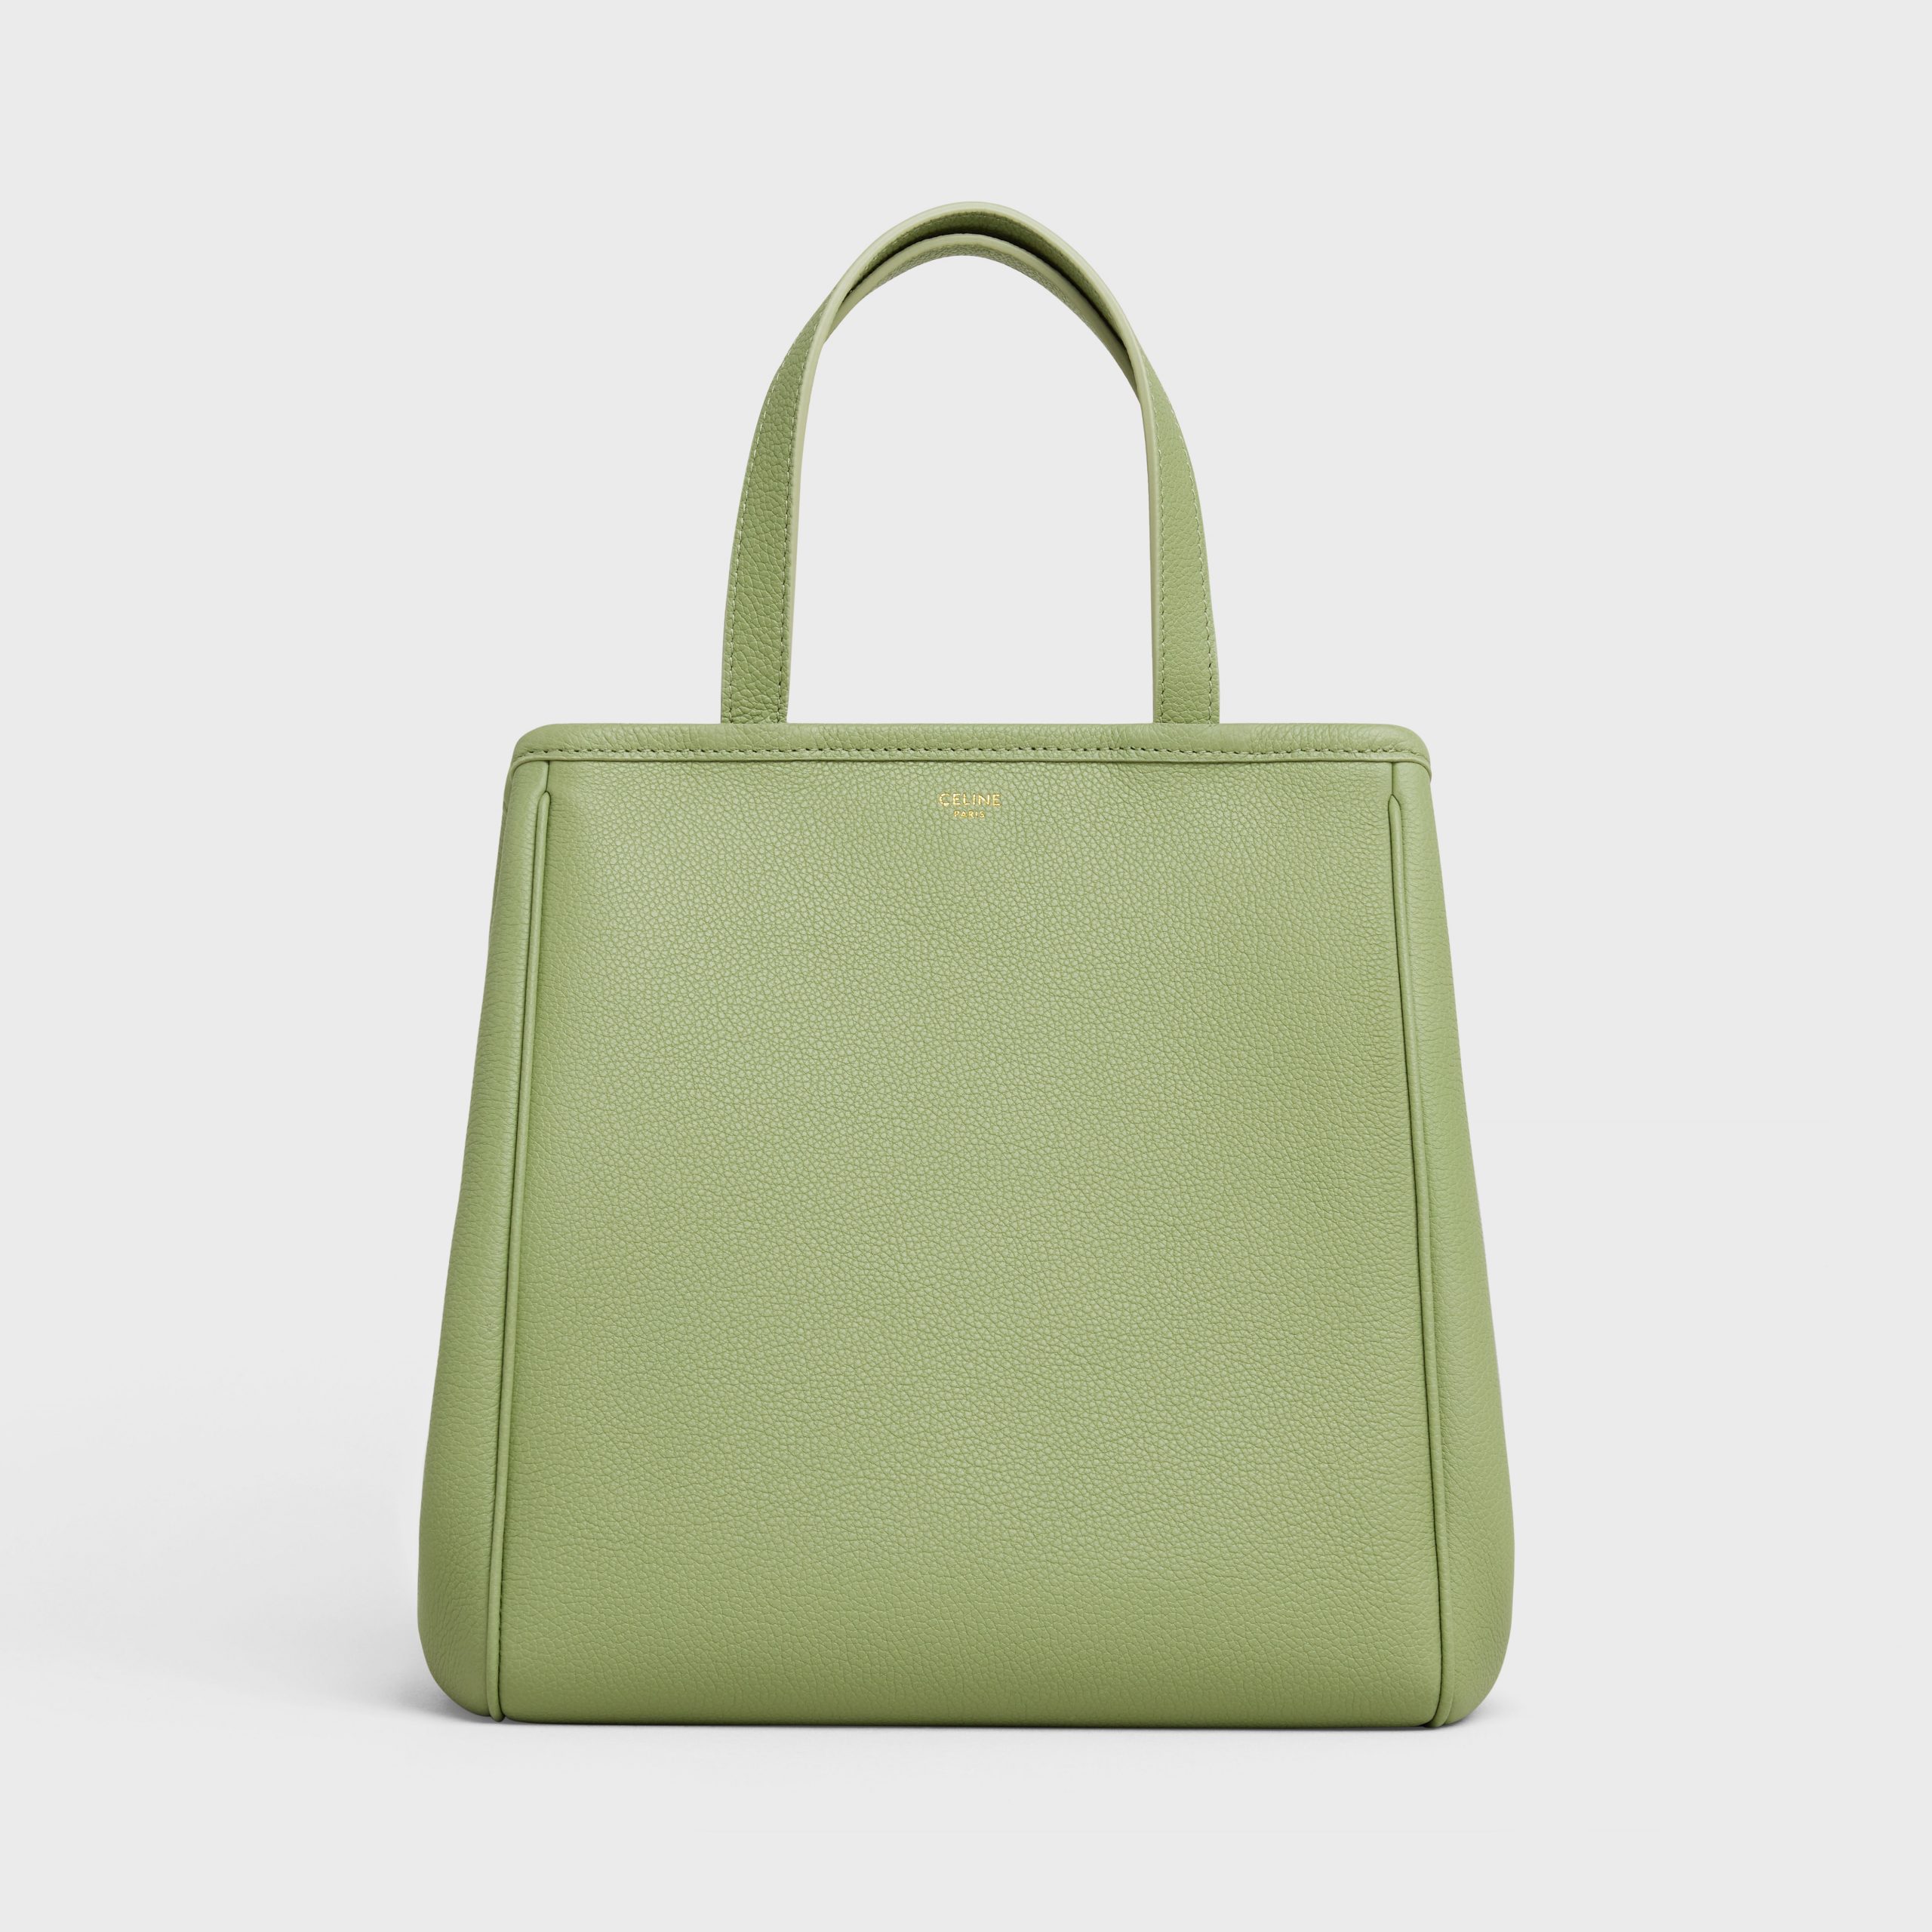 Celine Small Folded Cabas In Grained Calfskin – Sage – 194073CR7.31SA